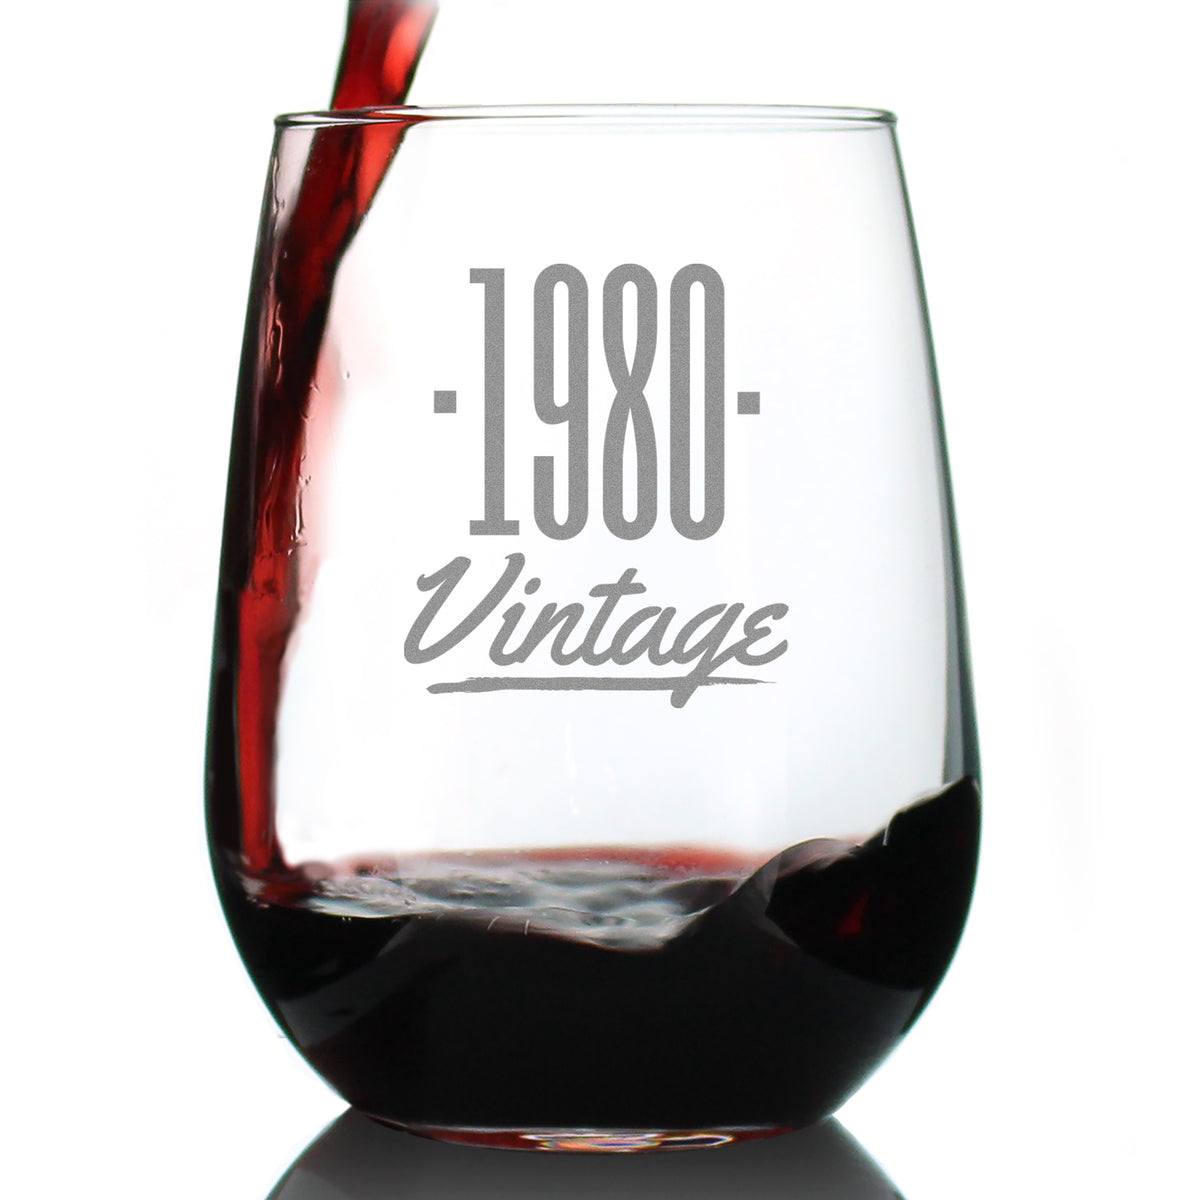 Vintage 1980 - 44th Birthday Stemless Wine Glass Gifts for Women &amp; Men Turning 44 - Bday Party Decor - Large Glasses